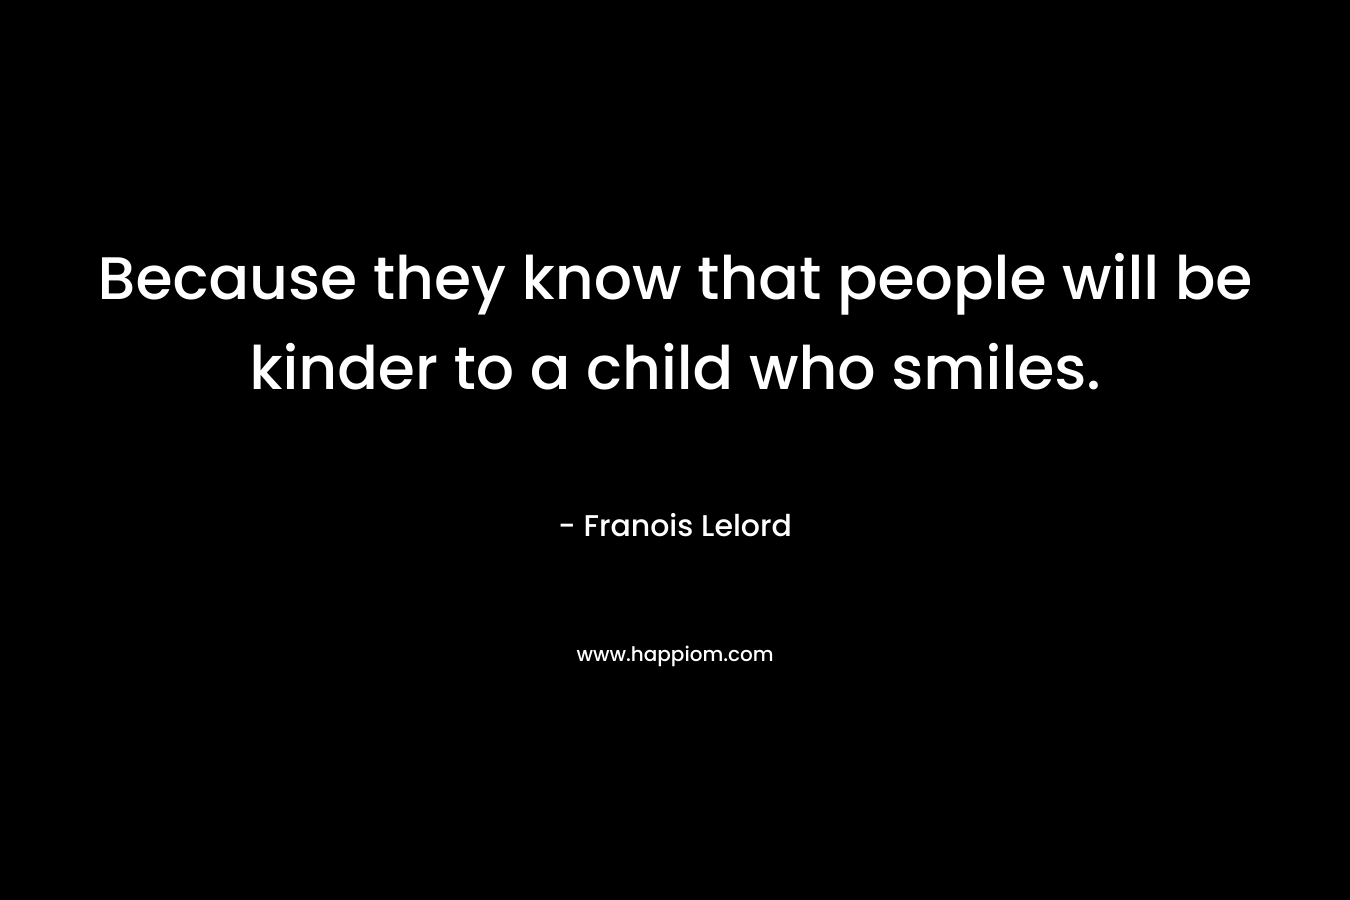 Because they know that people will be kinder to a child who smiles.